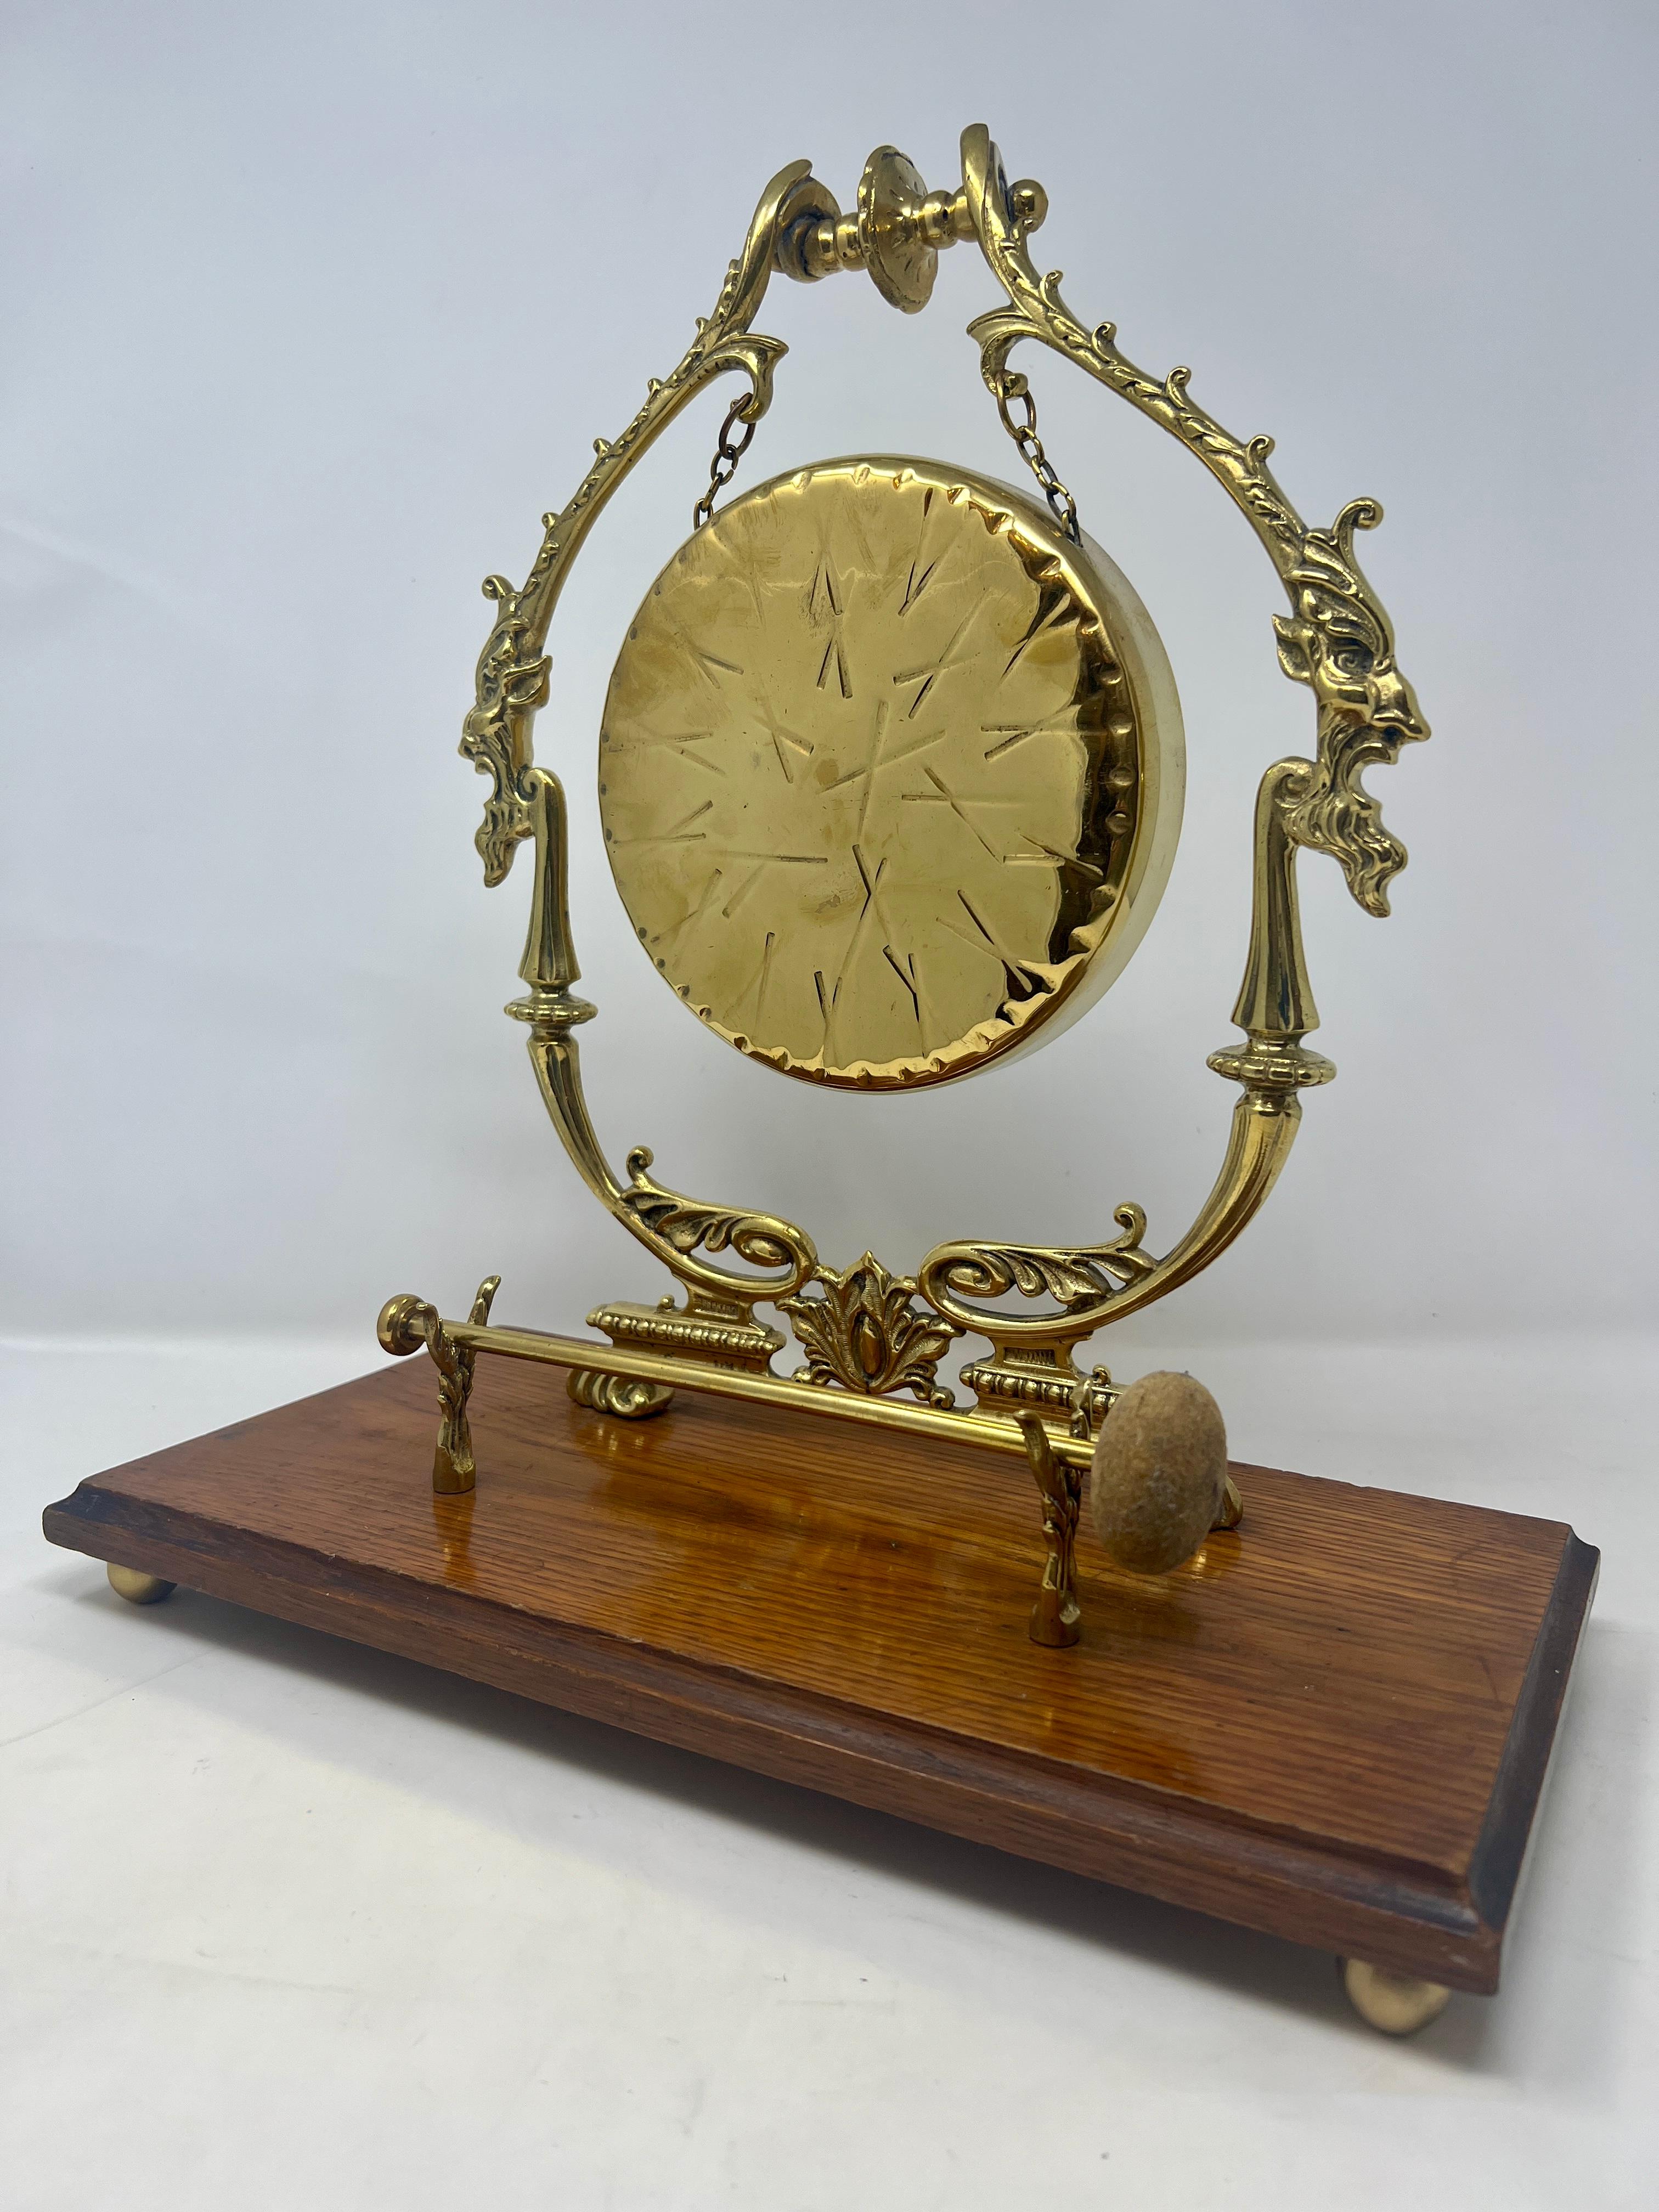 Antique English Brass And Oak Tabletop Gong, Circa 1910.
Wonderful lines and intricate designs in brass.